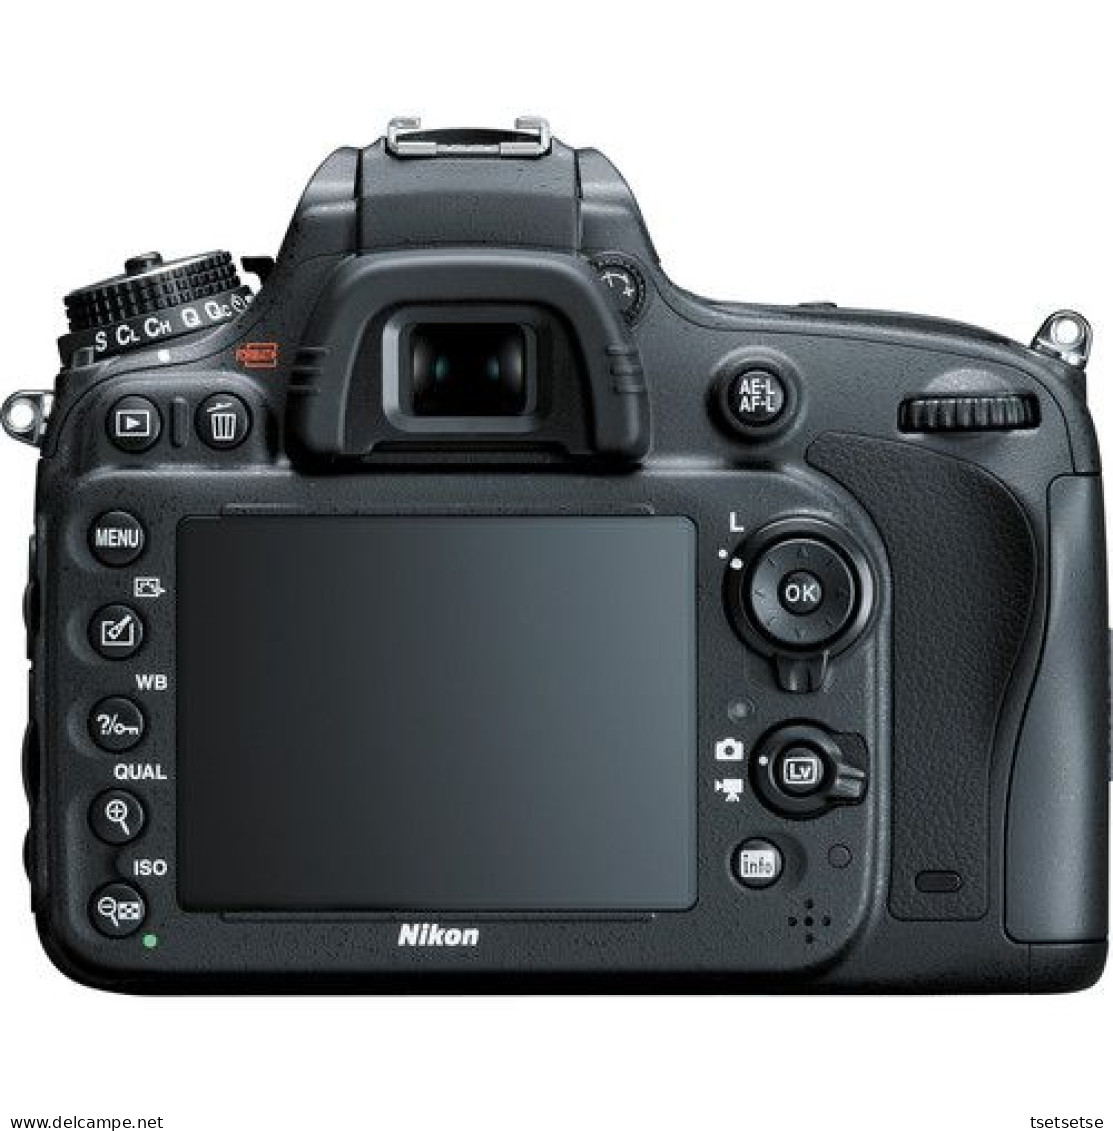 Your Choice $2,032 Or $1,099? "Brand NEW" Nikon Full-frame FX D610 DSLR Camera Kit - Fotoapparate